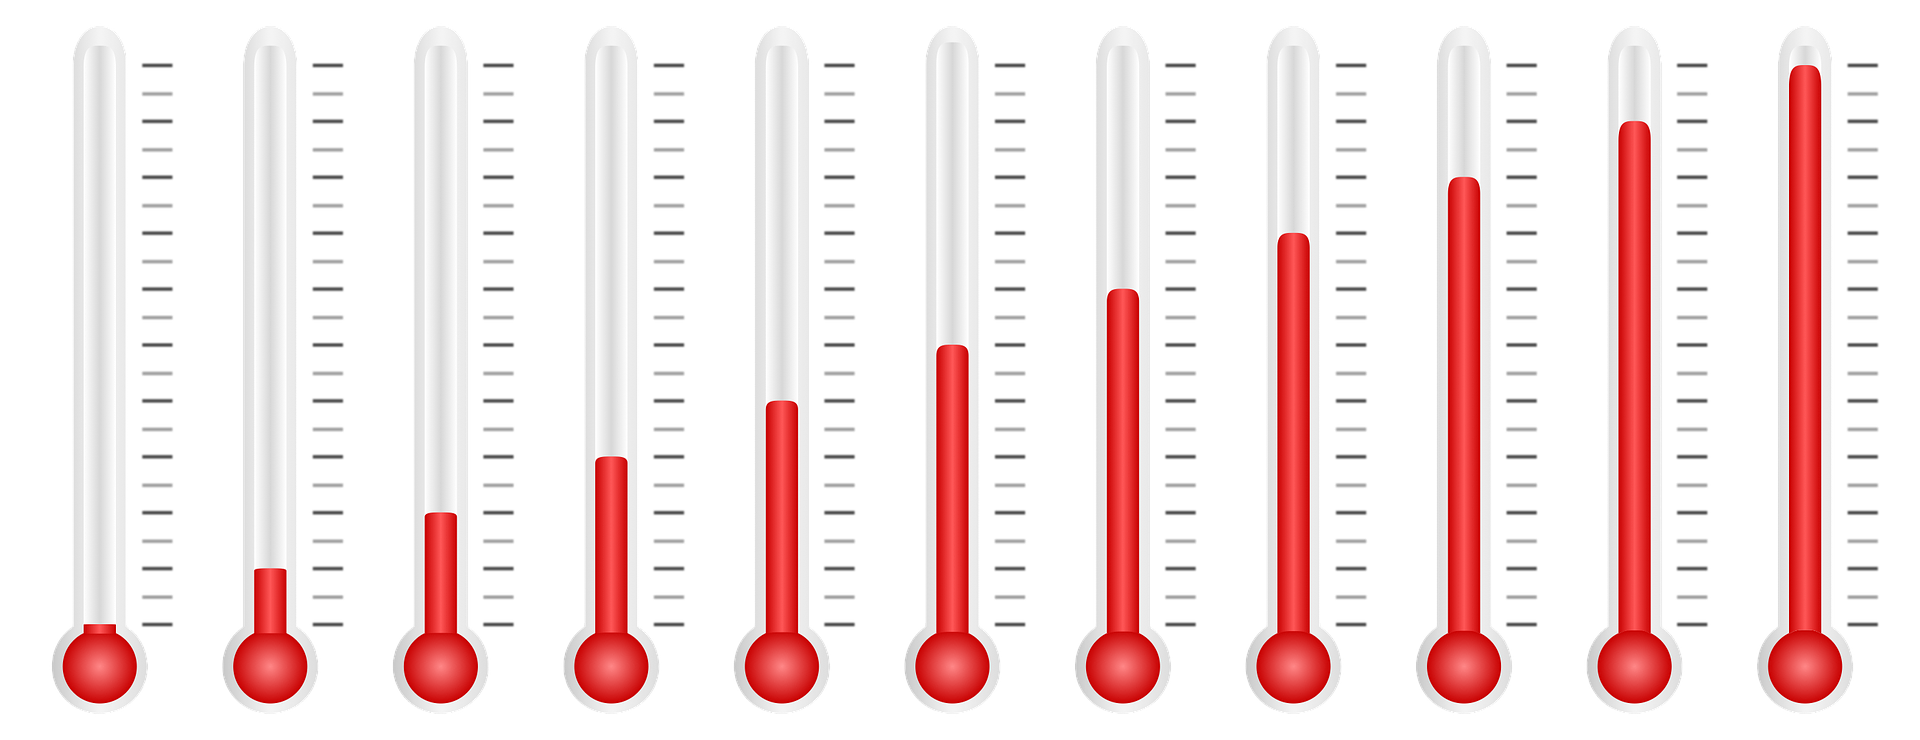 thermometer-1917500_1920.png